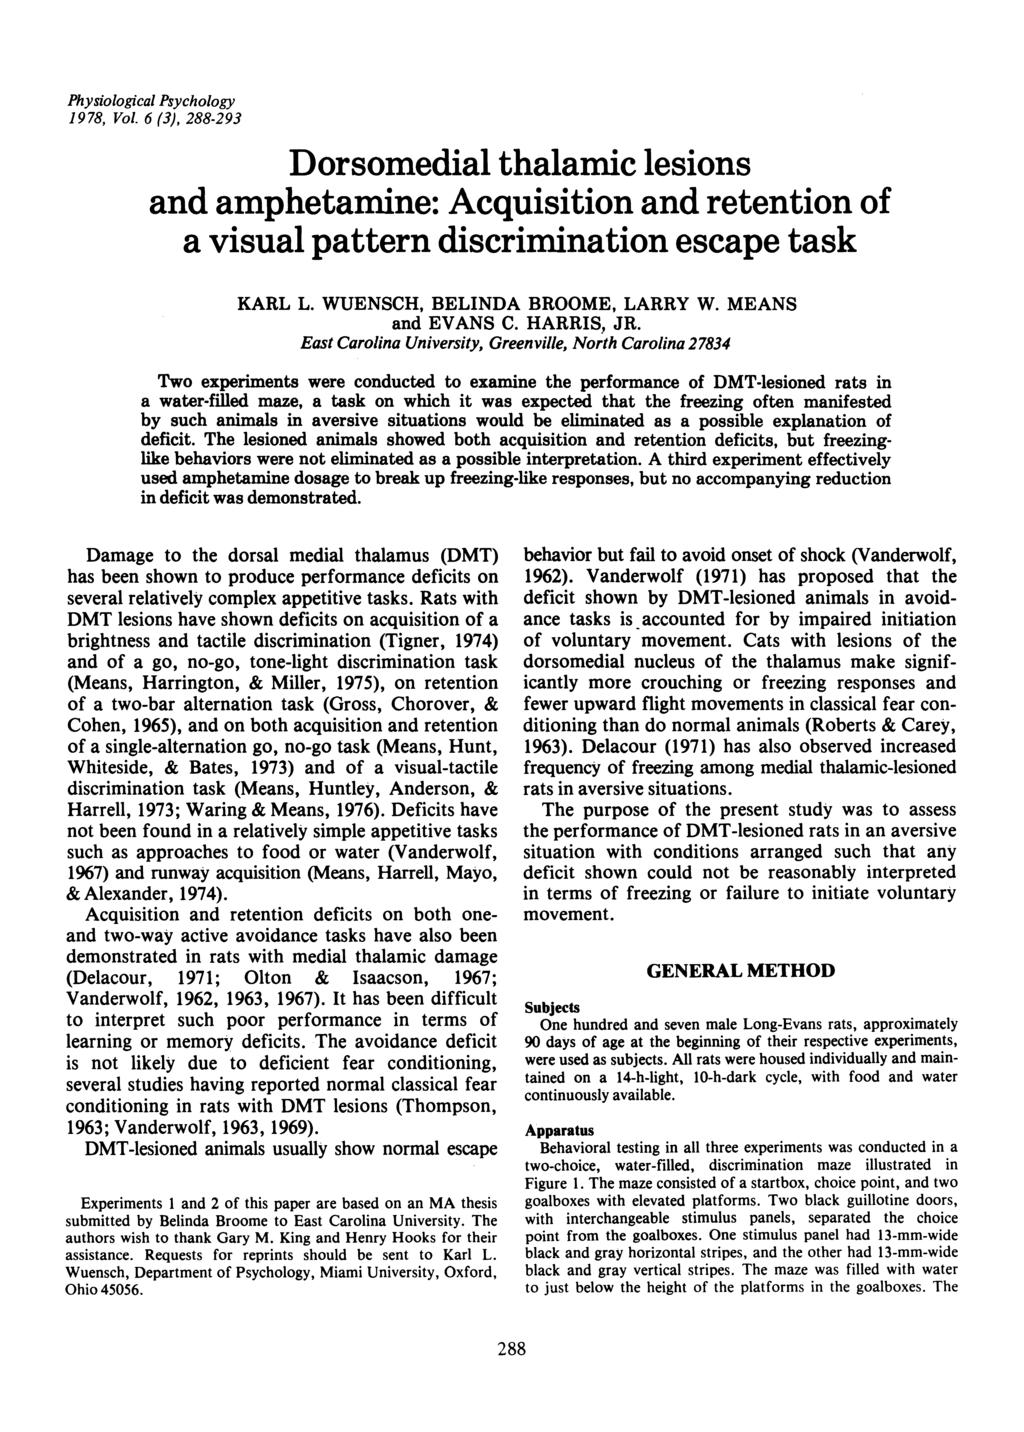 Physiological Psychology 1978, Vol. 6 (3),288-293 Dorsomedial thalamic lesions and amphetamine: Acquisition and retention of a visual pattern discrimination escape task KARL L.